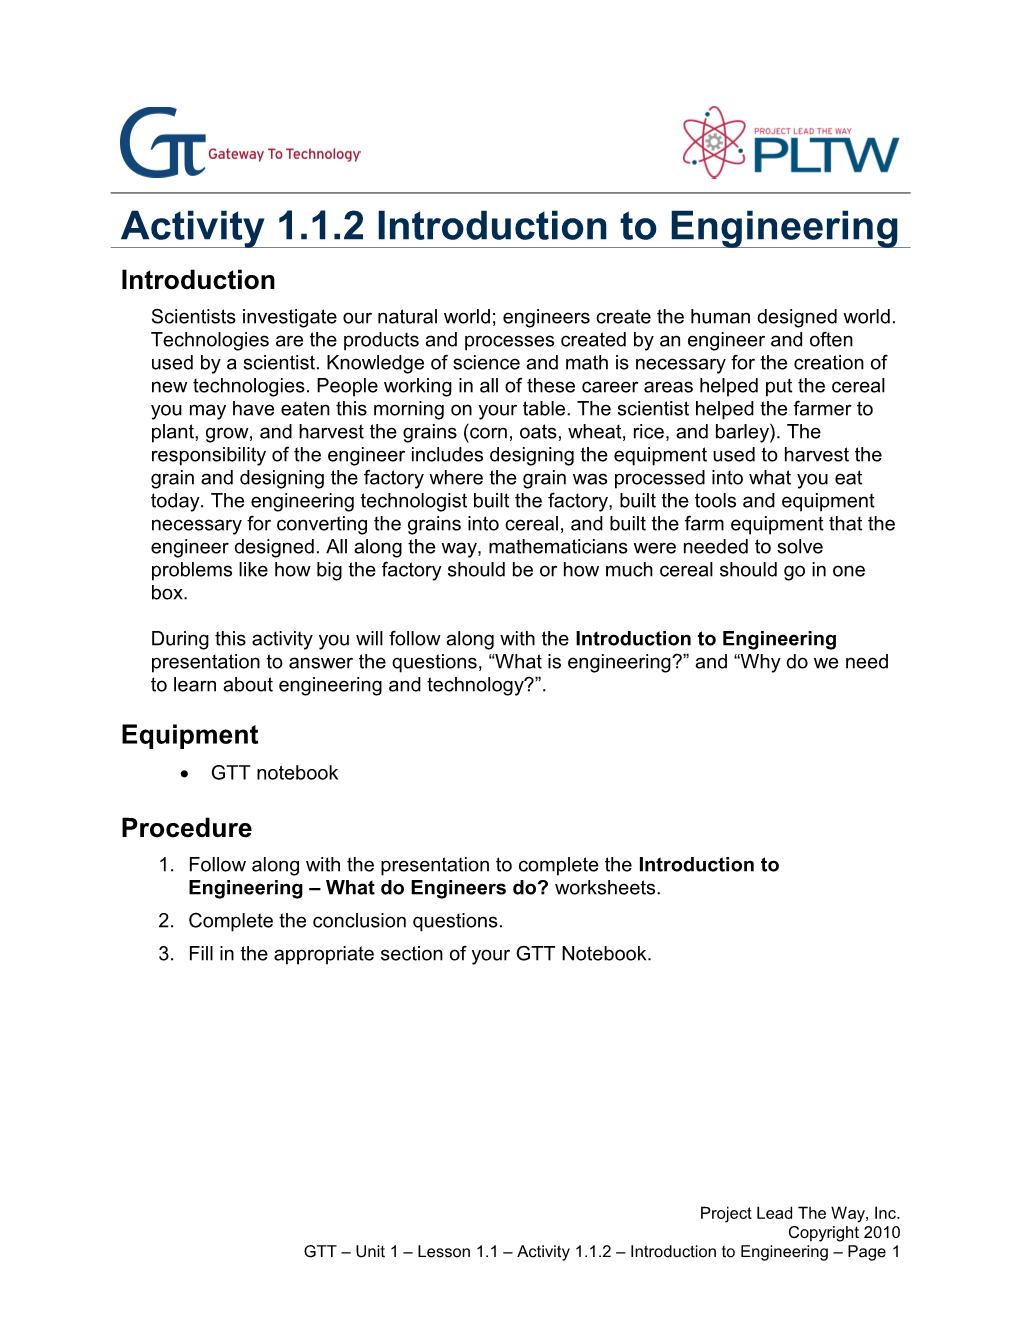 Activity 1.1.2 Introduction to Engineering s1